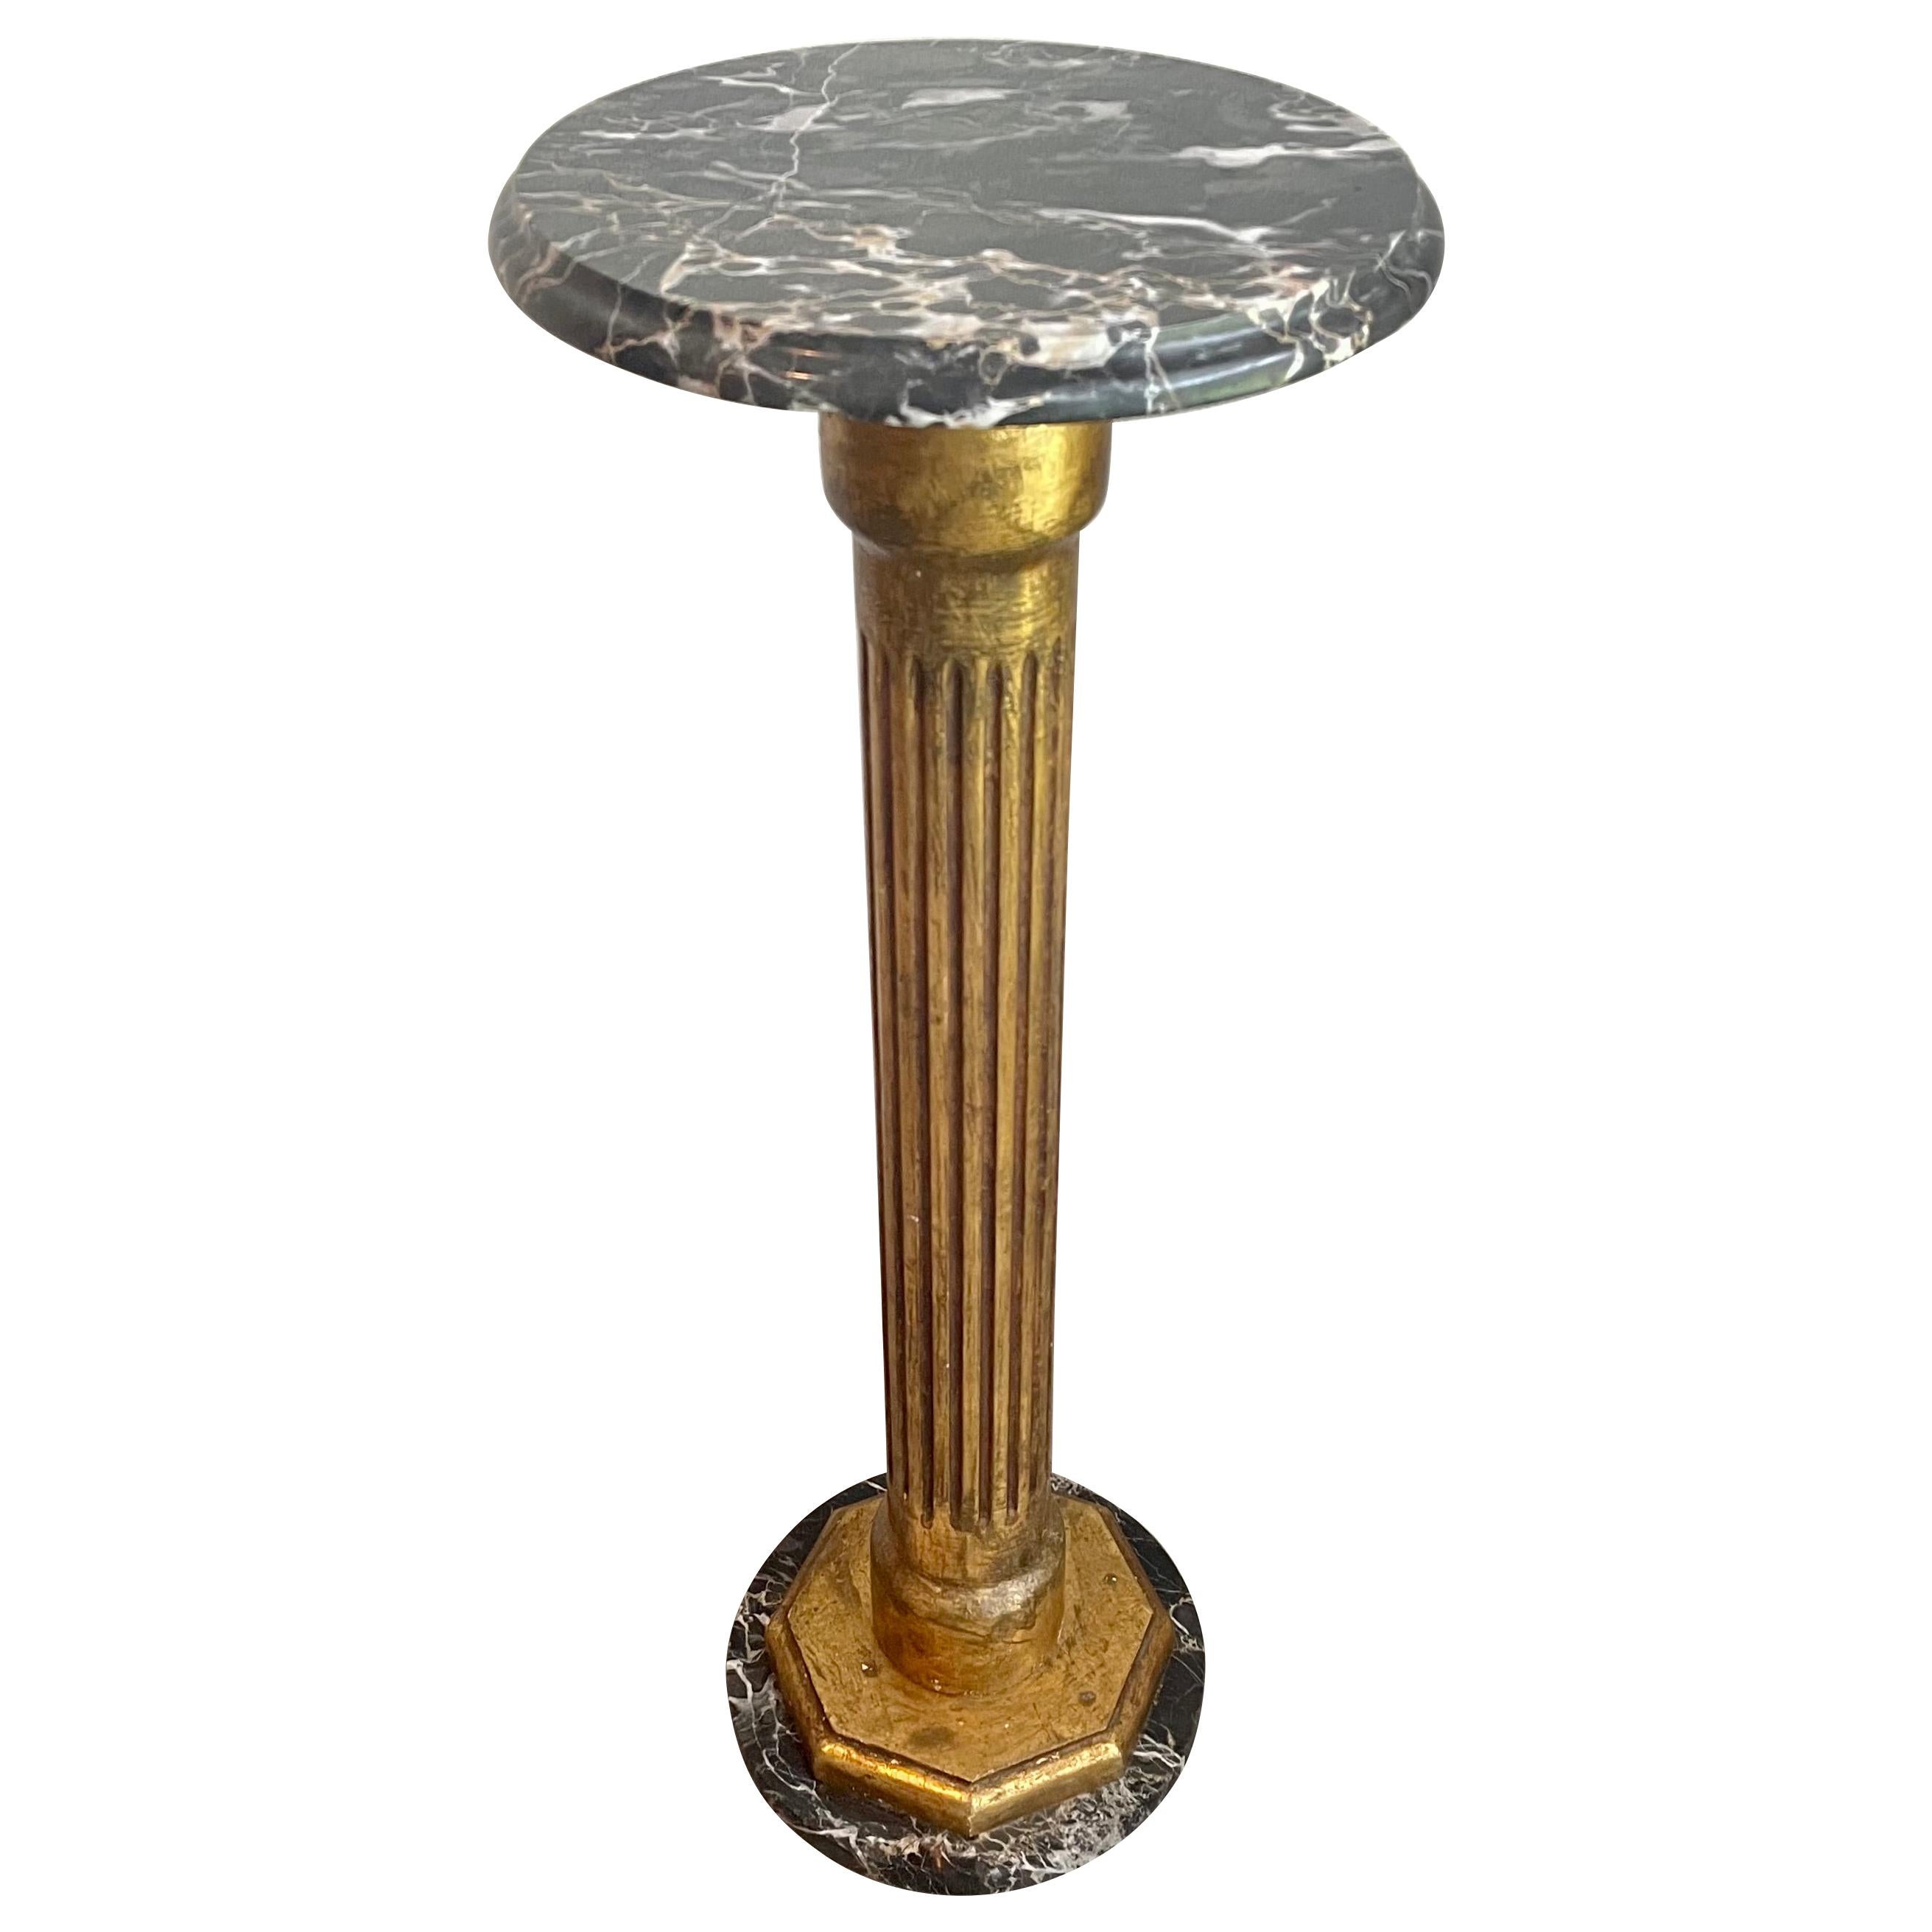 Marble and Glit Wood Pedestal